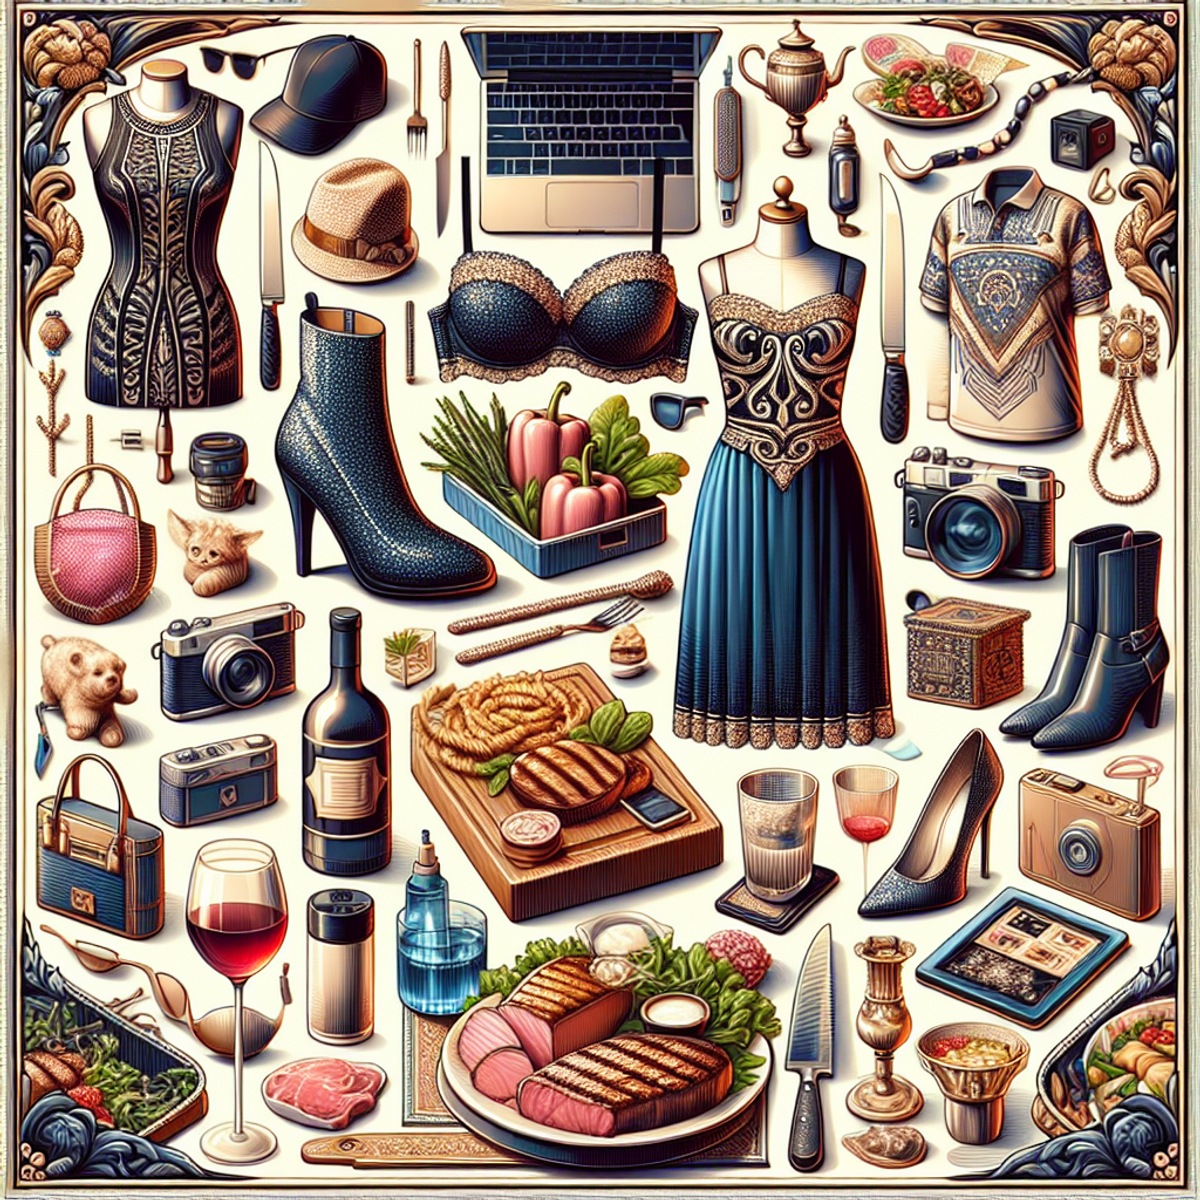 A high-resolution image of a thoughtfully curated display representing various industries. It includes a stylish dress, a trendy hat, sparkly shoes, a decorative vase, an ornate mirror, a modern lamp, a sleek laptop, earphones, and a juicy steak with grilled vegetables. Rich in vibrant colors and high attention to detail.